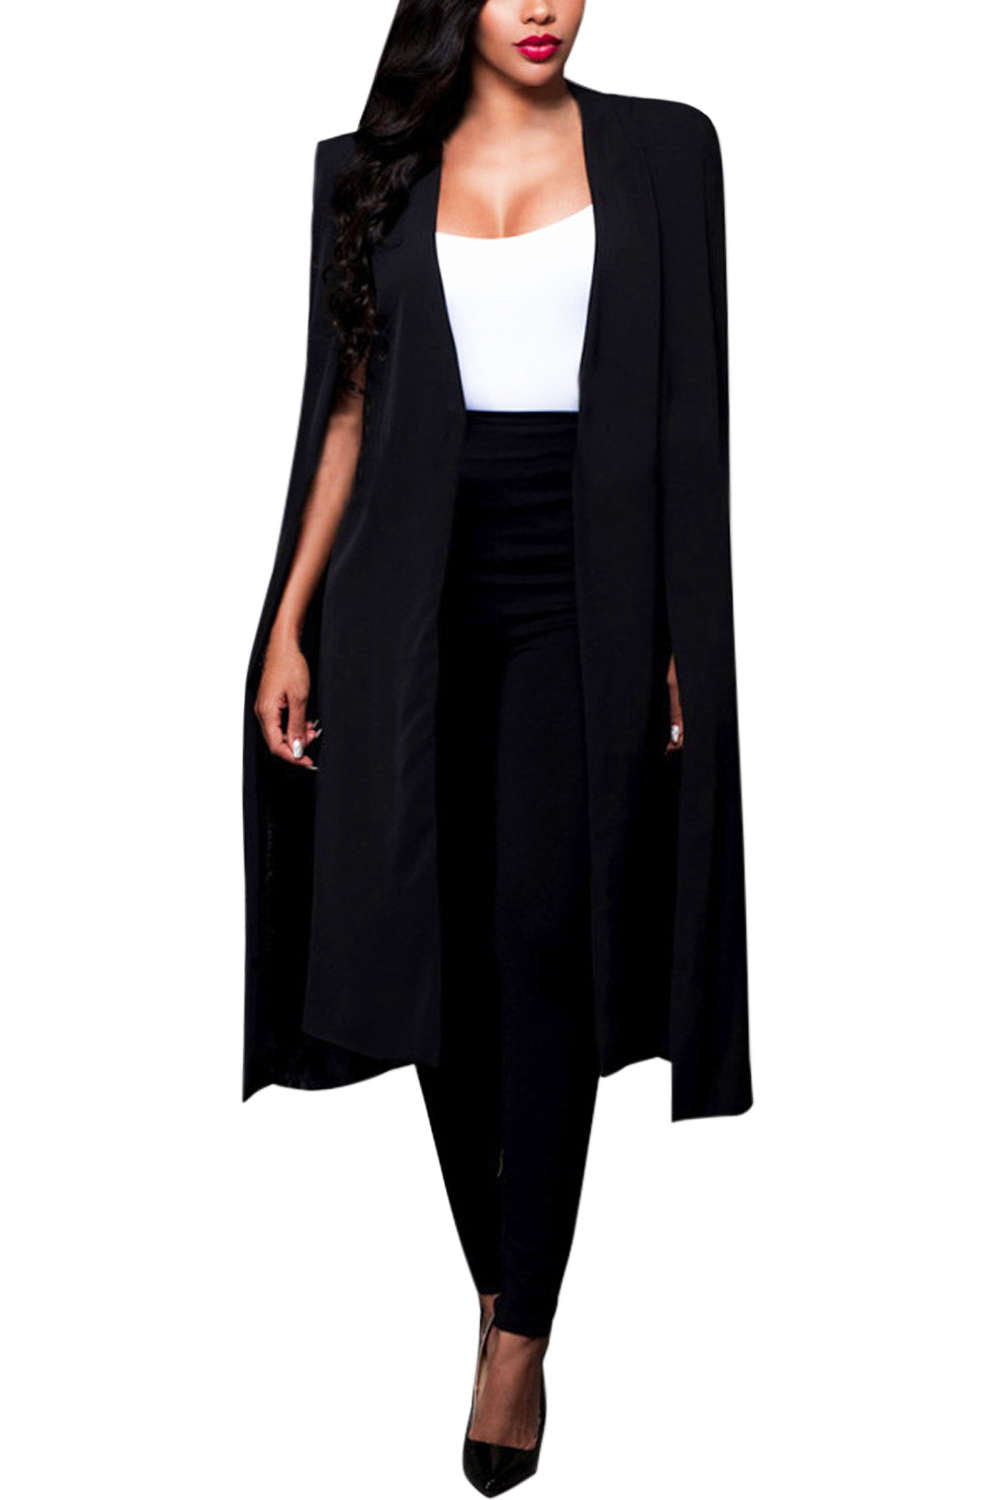 Iyasson Open Front Cape with Pocket Trench Coat